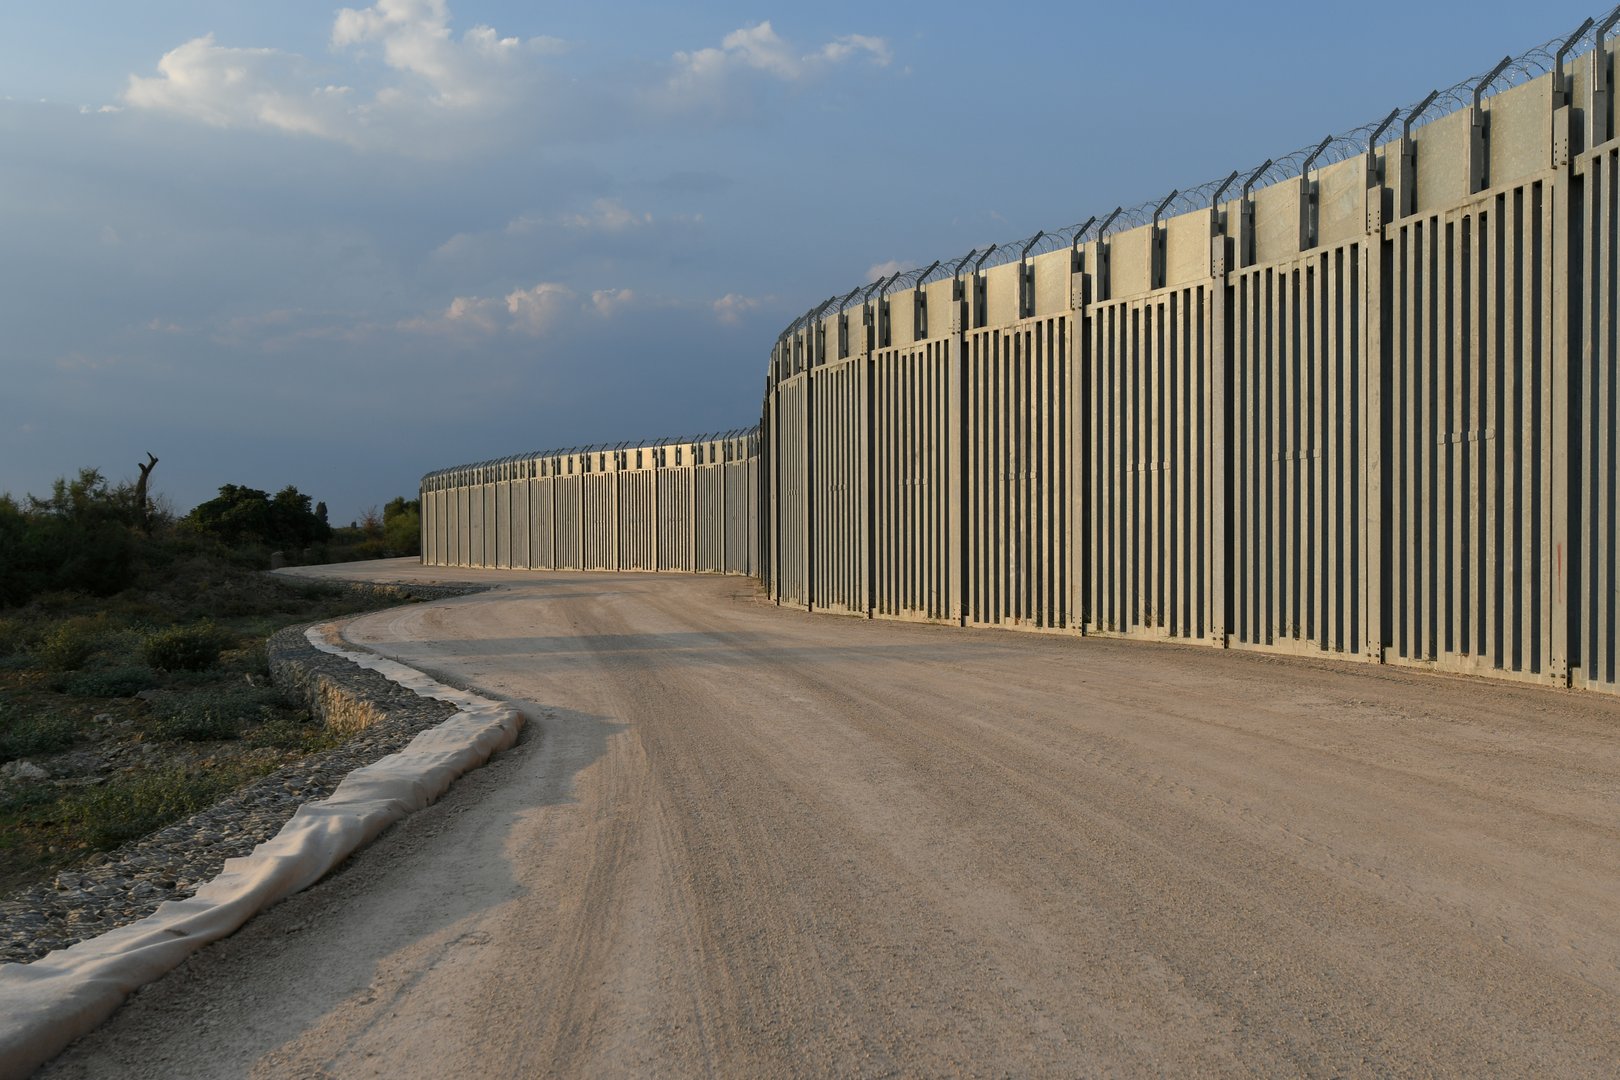 image Greece completes border wall extension, surveillance to deter migrants